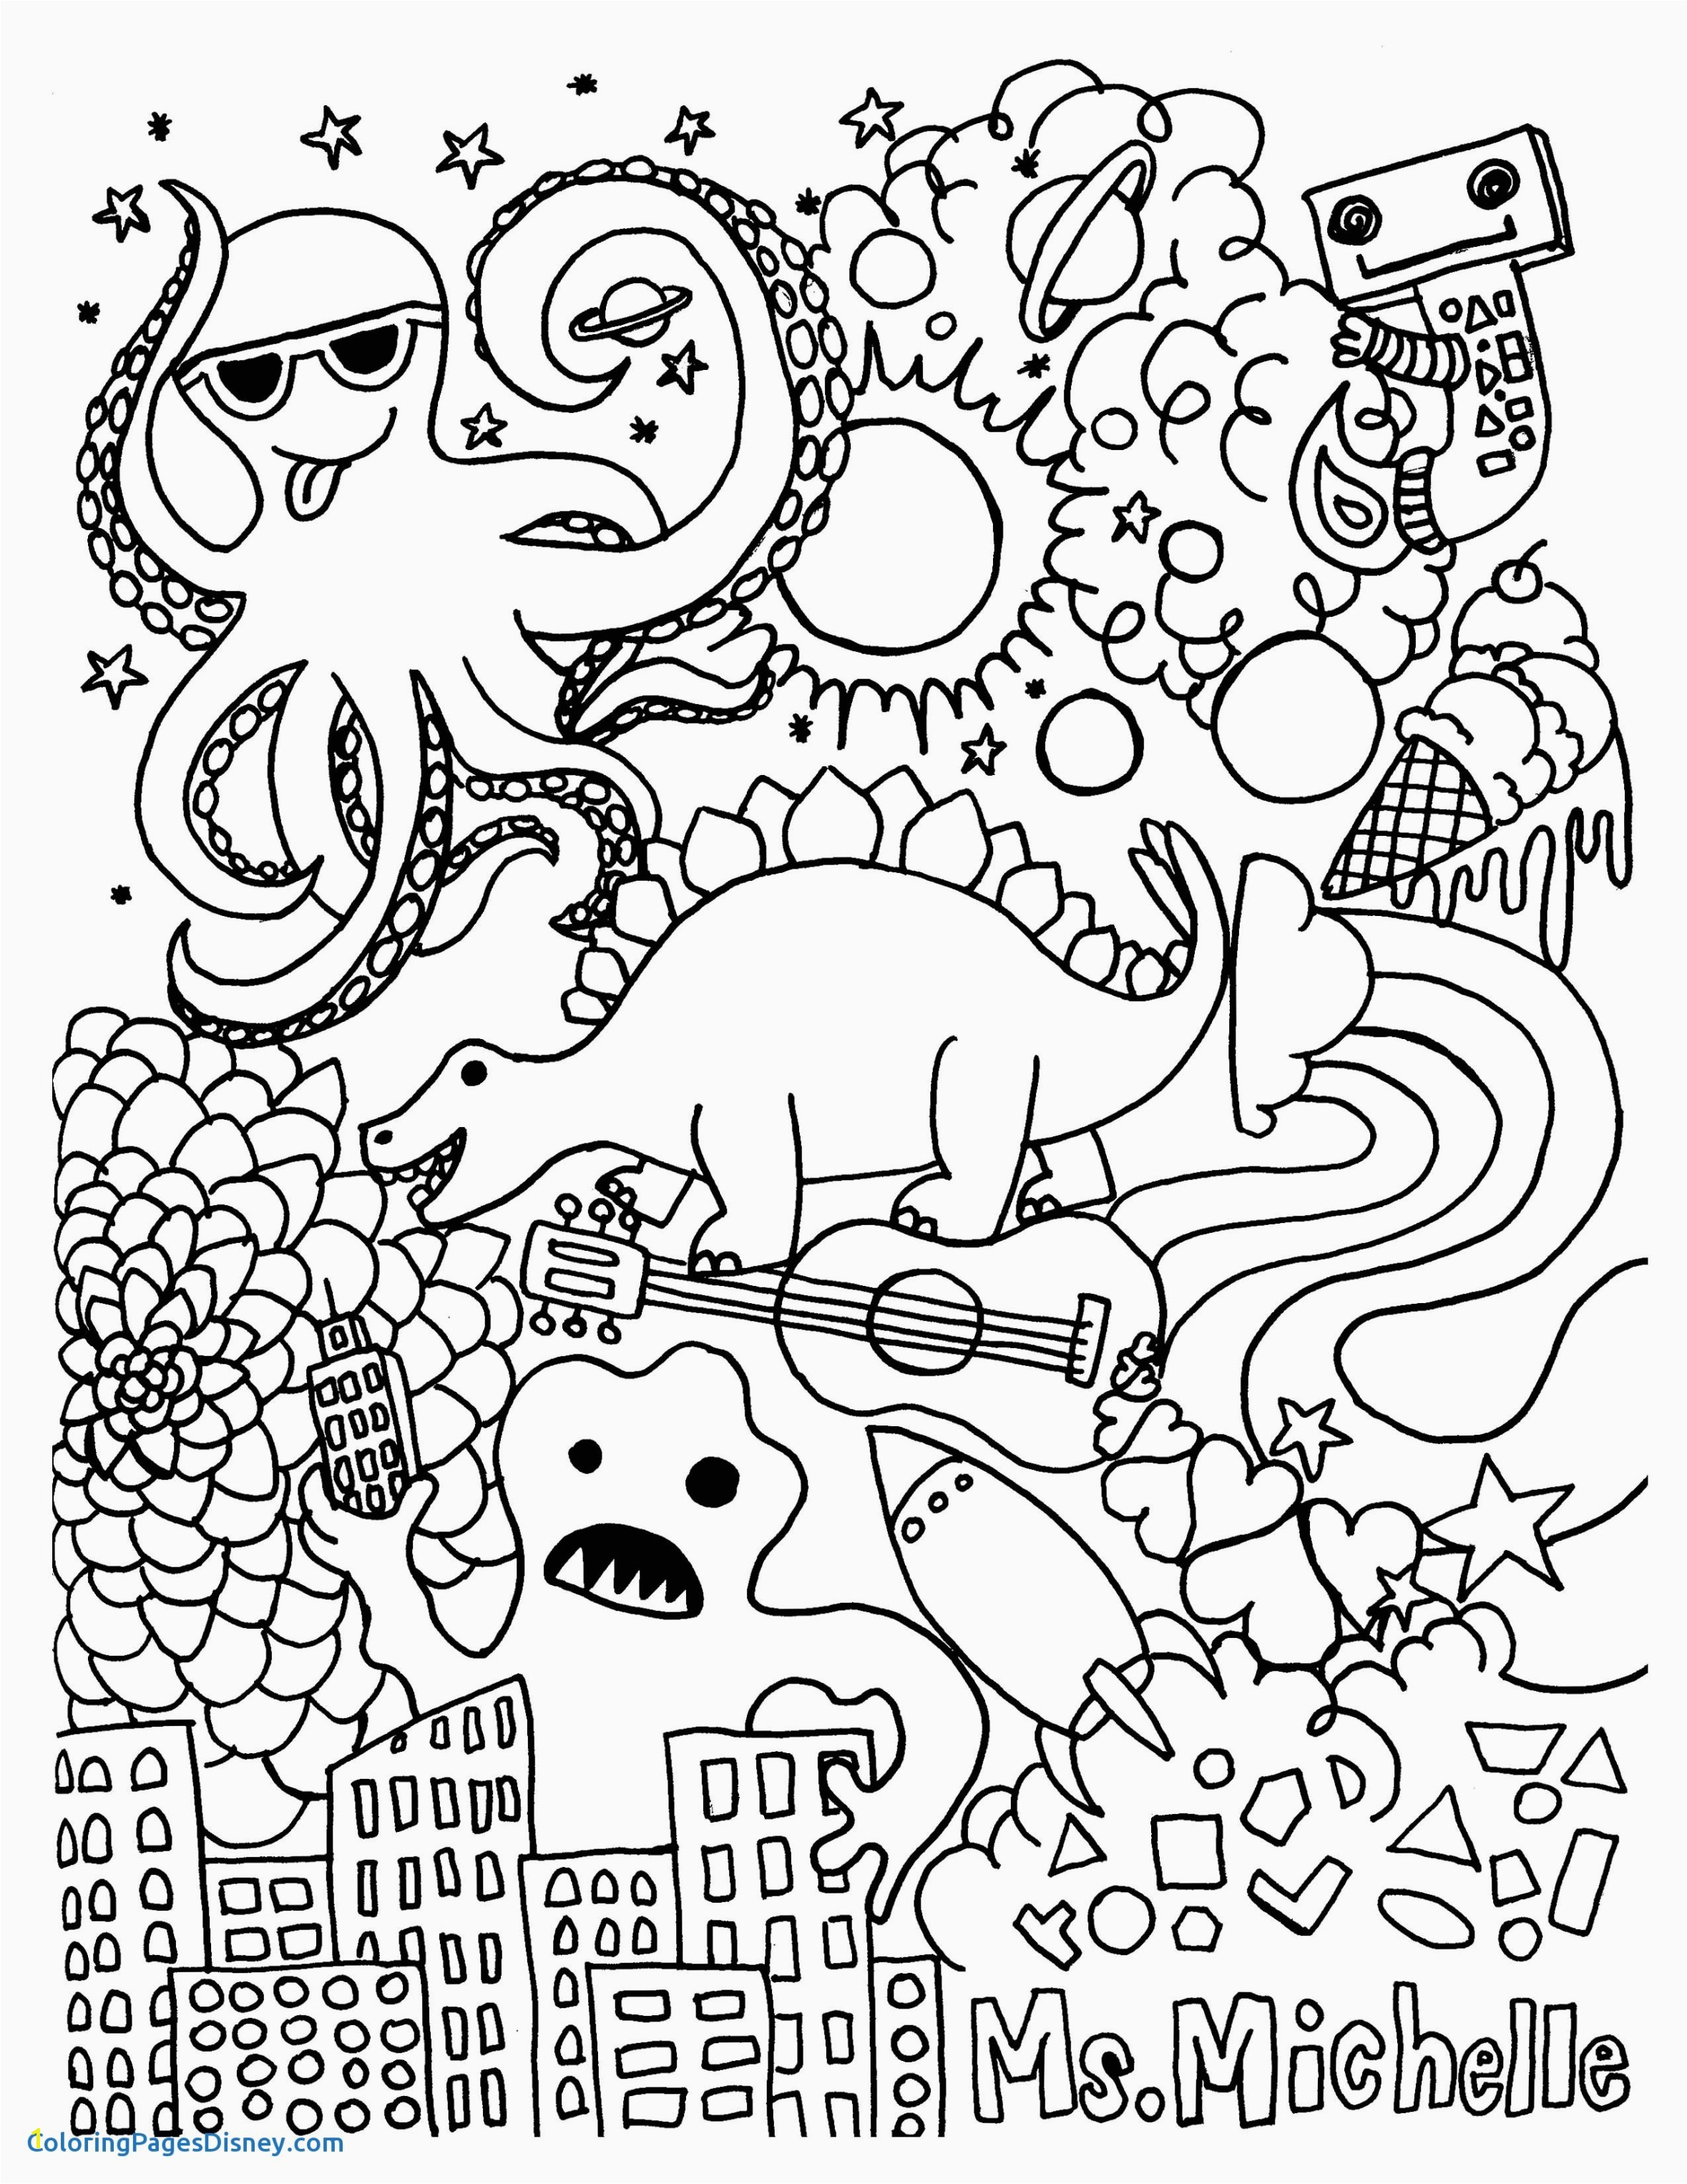 Stream Coloring Page Pocoyo Coloring Pages Printable